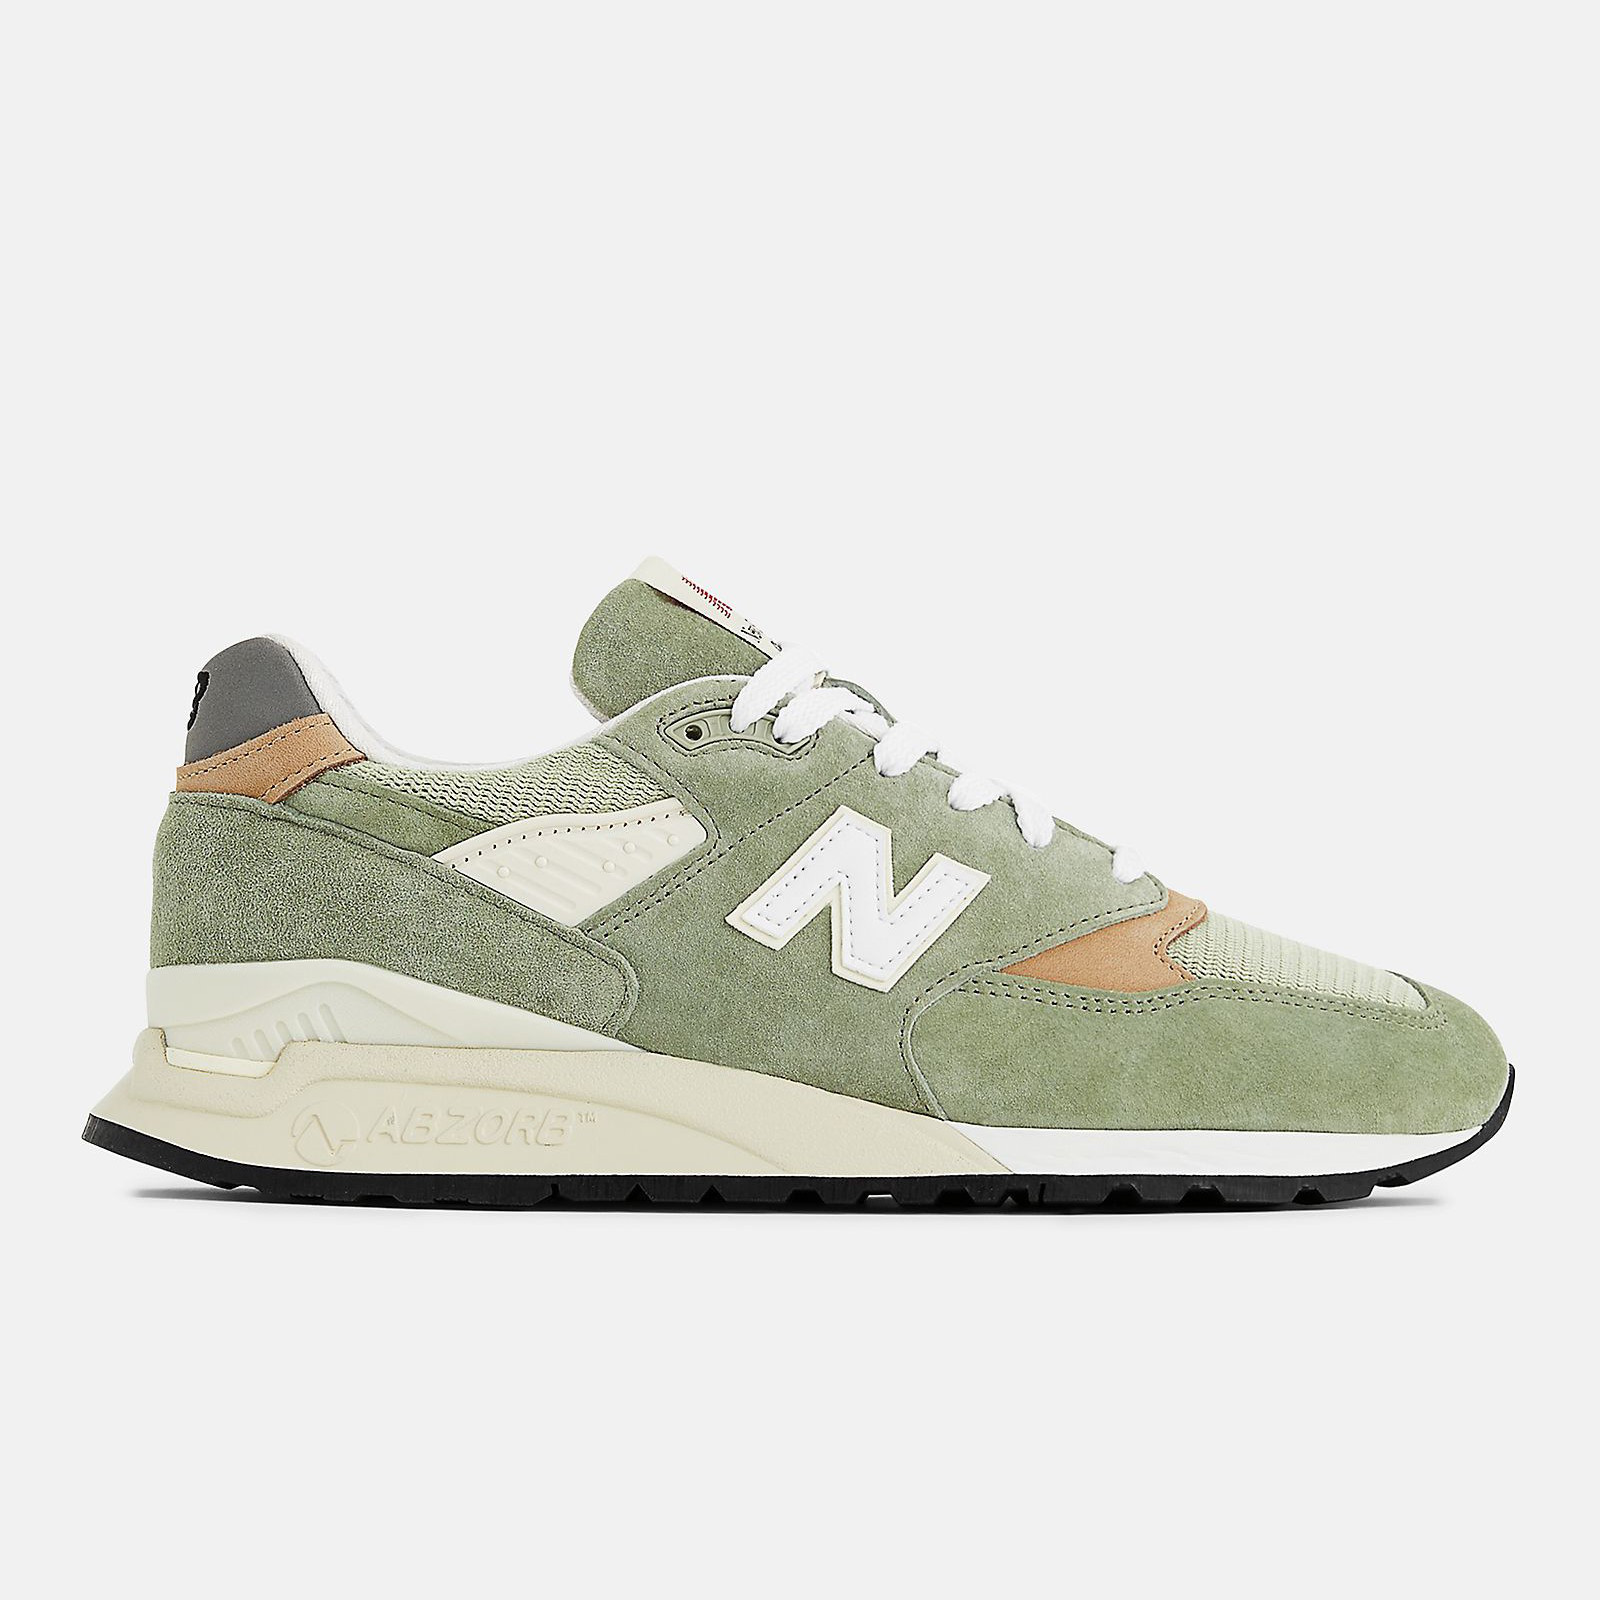 New Balance U998GT
Made in USA
Olive / Incense